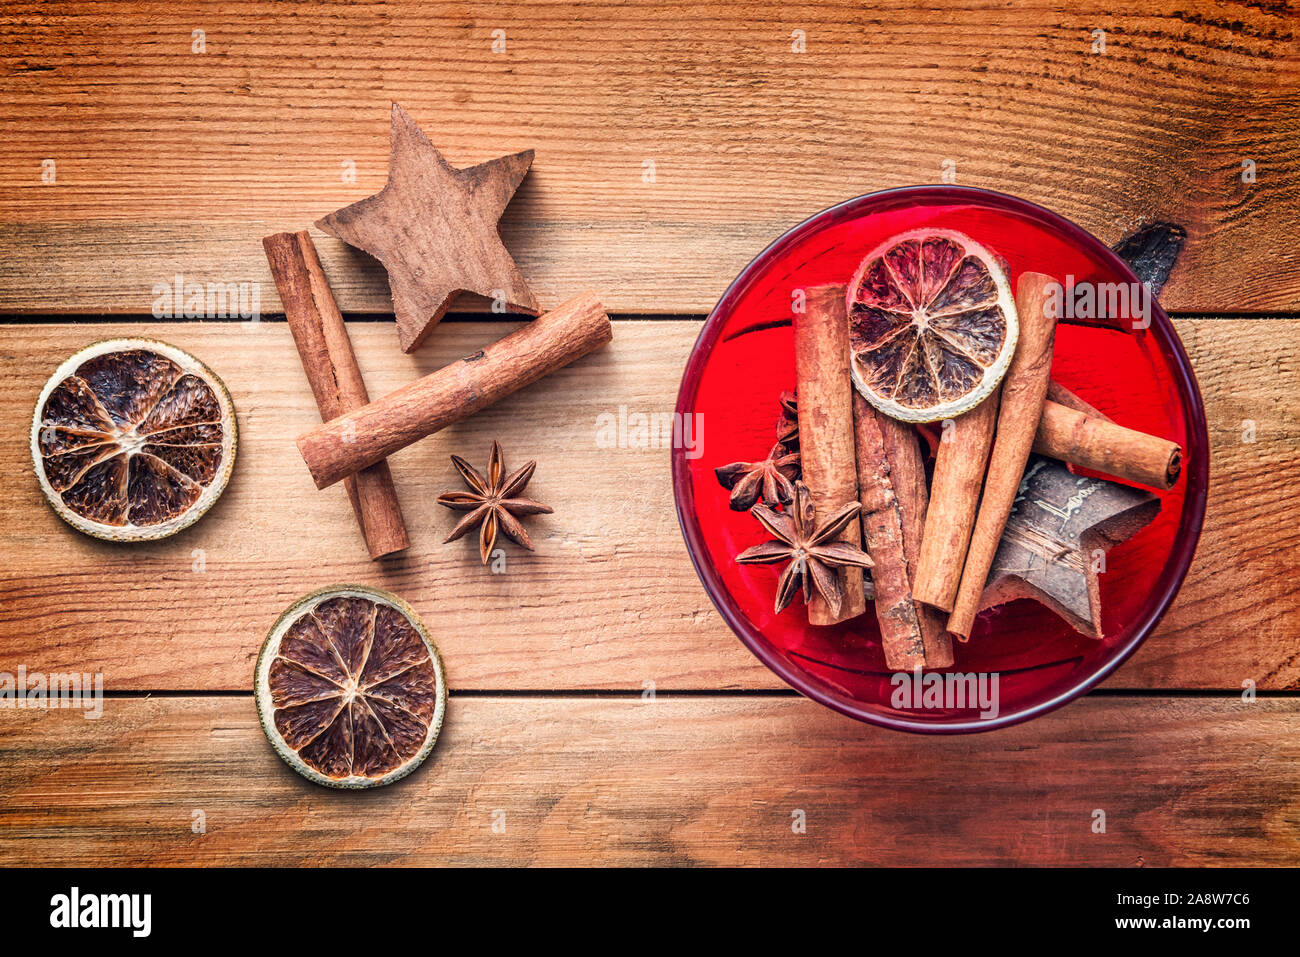 Top view of Christmas spices with dried orange and cinnamon on wooden table background, vintage christmas kitchen decor Stock Photo